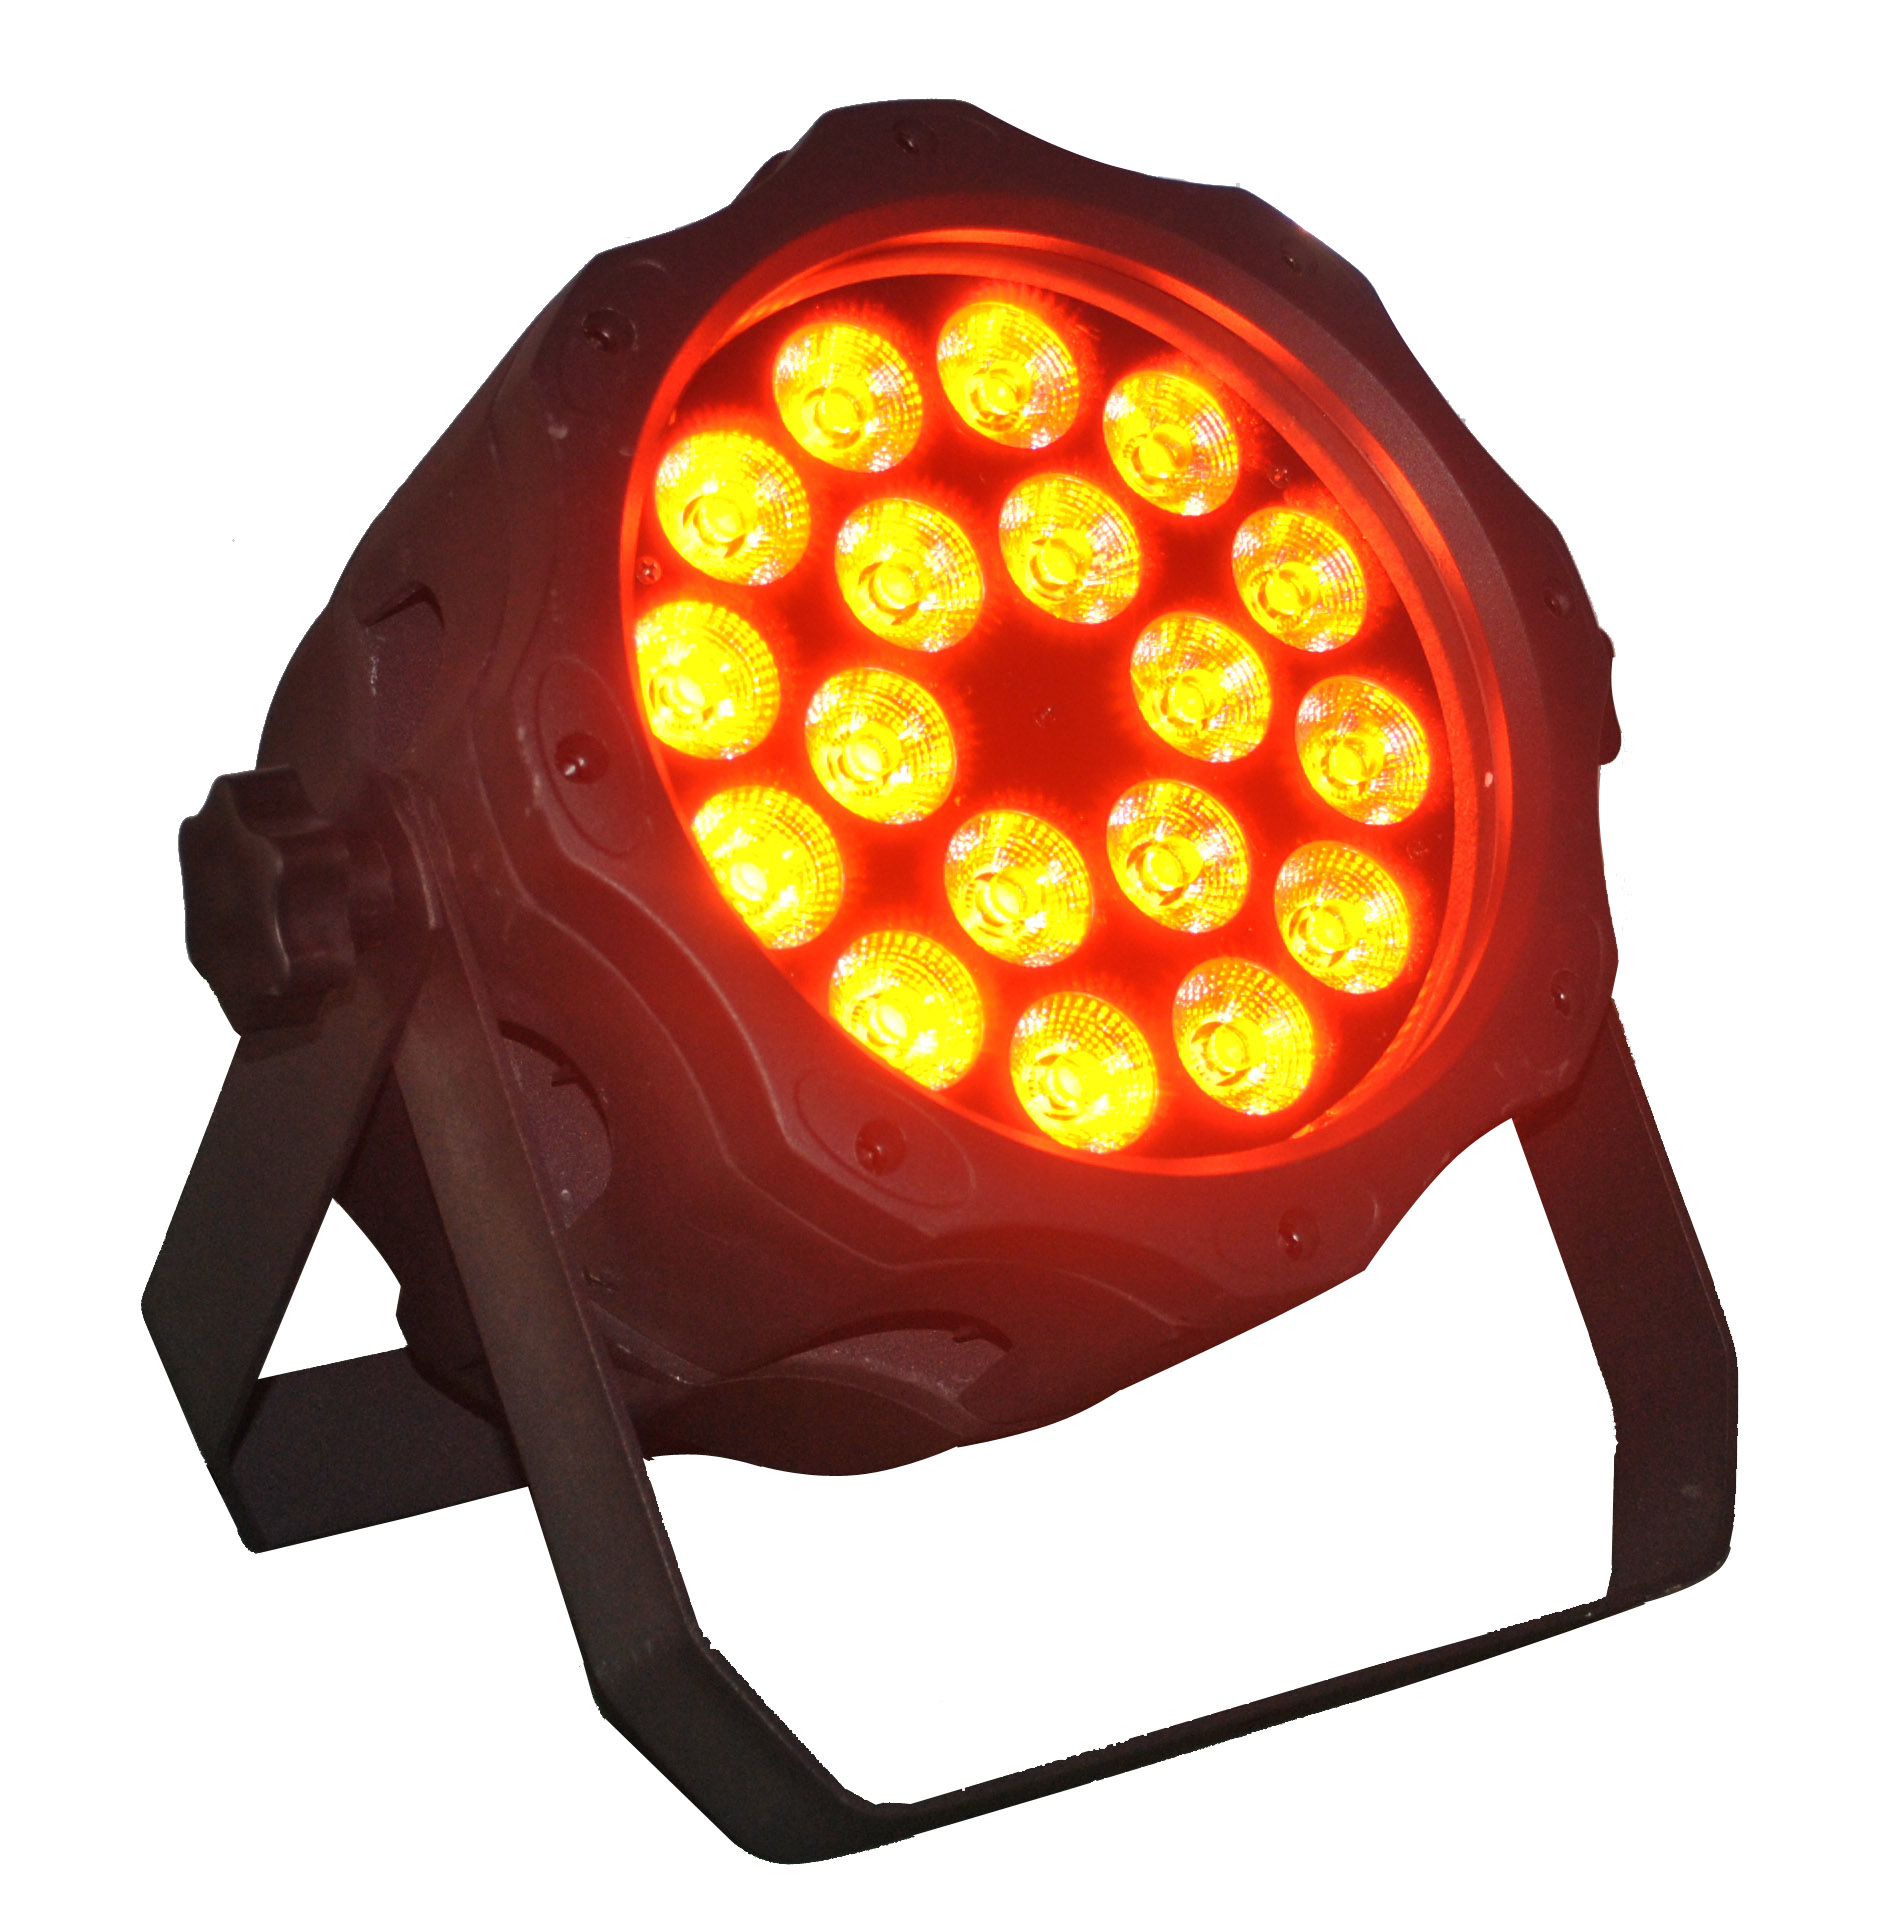 Outdoor 18X18W 6in1 Led Par Can Light HS-P64-1818Out - Led stage light - 3